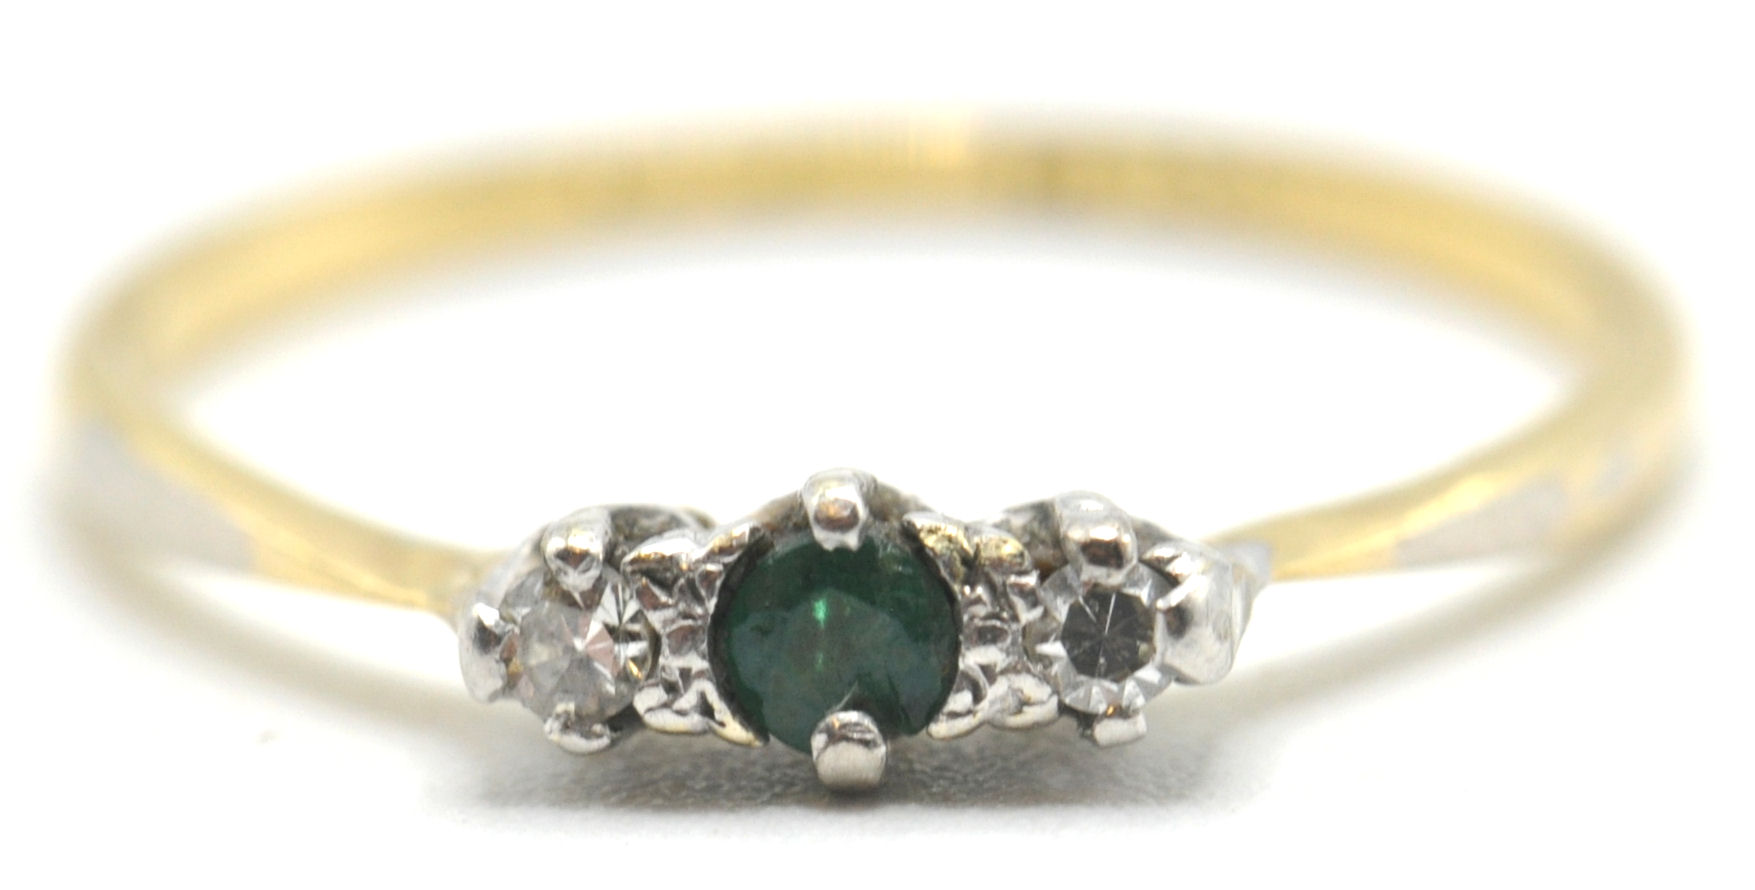 A hallmarked 18ct gold and platinum ring set with a green central stone flanked by 2 white stones. - Image 2 of 7